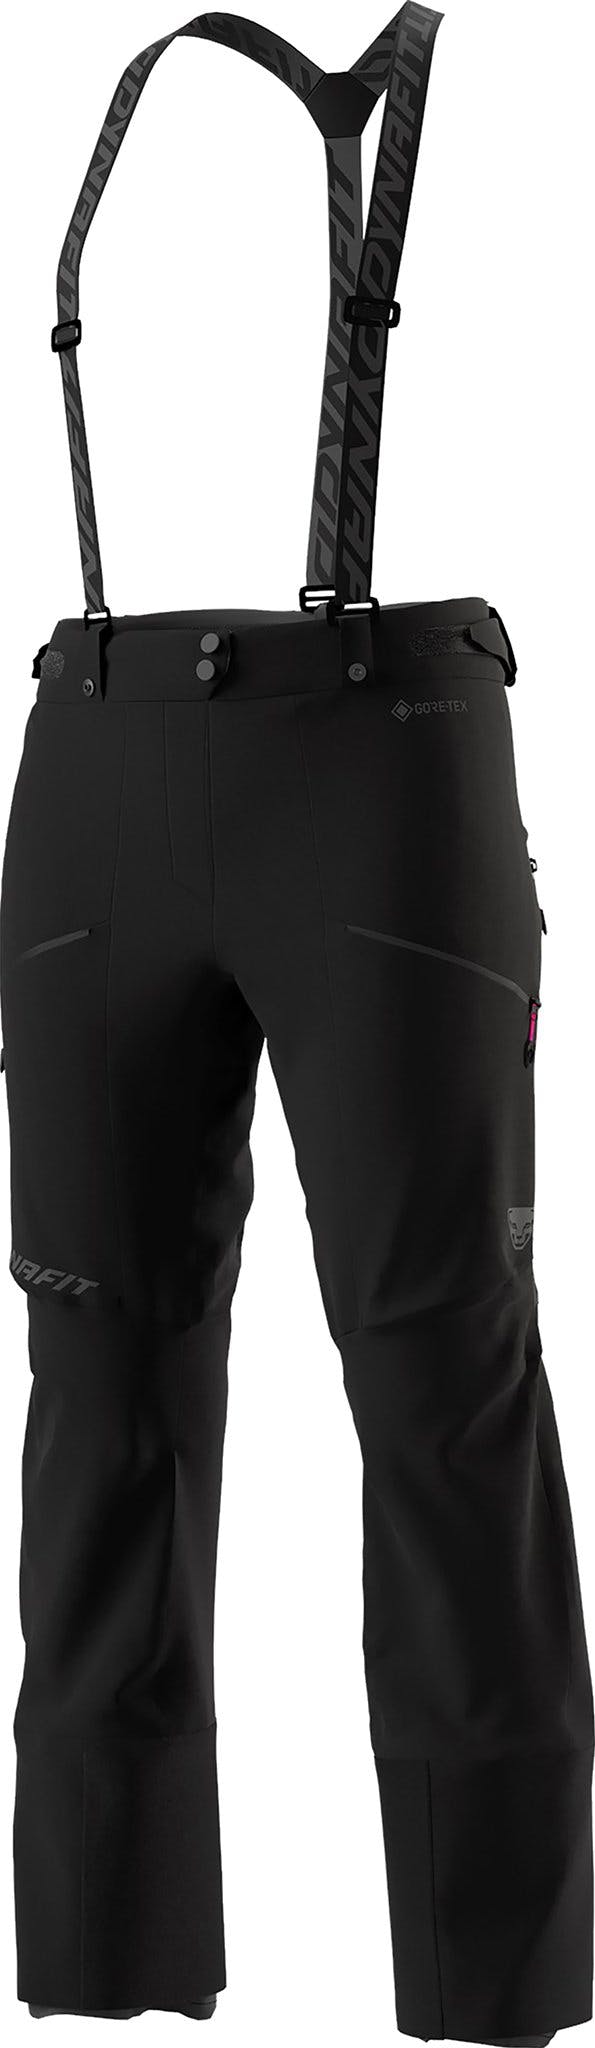 Product image for Free Infinium Hybrid Pant - Women's